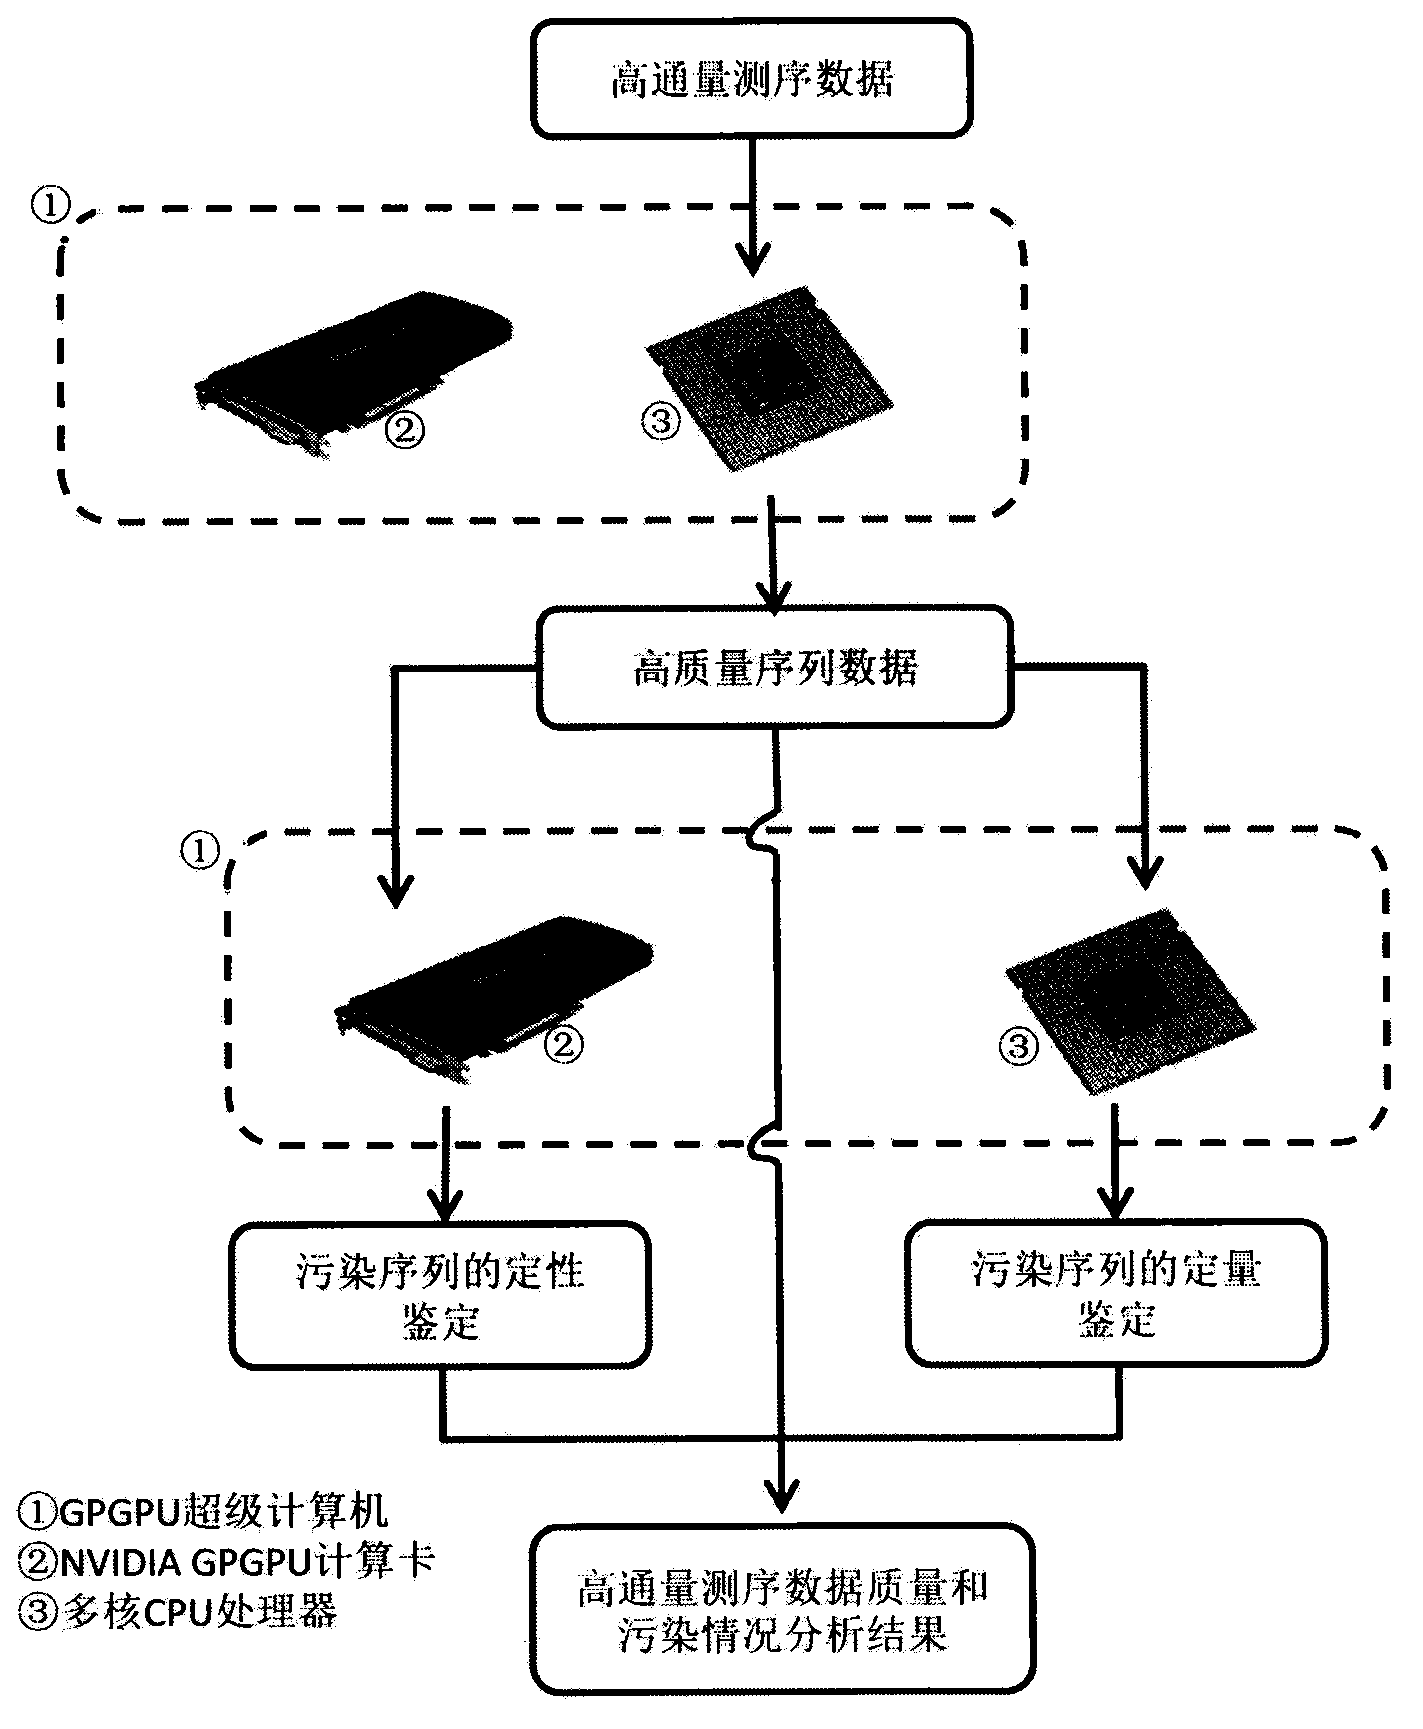 High-throughput sequencing data quality control system based on multi-core CPU and GPGPU hardware